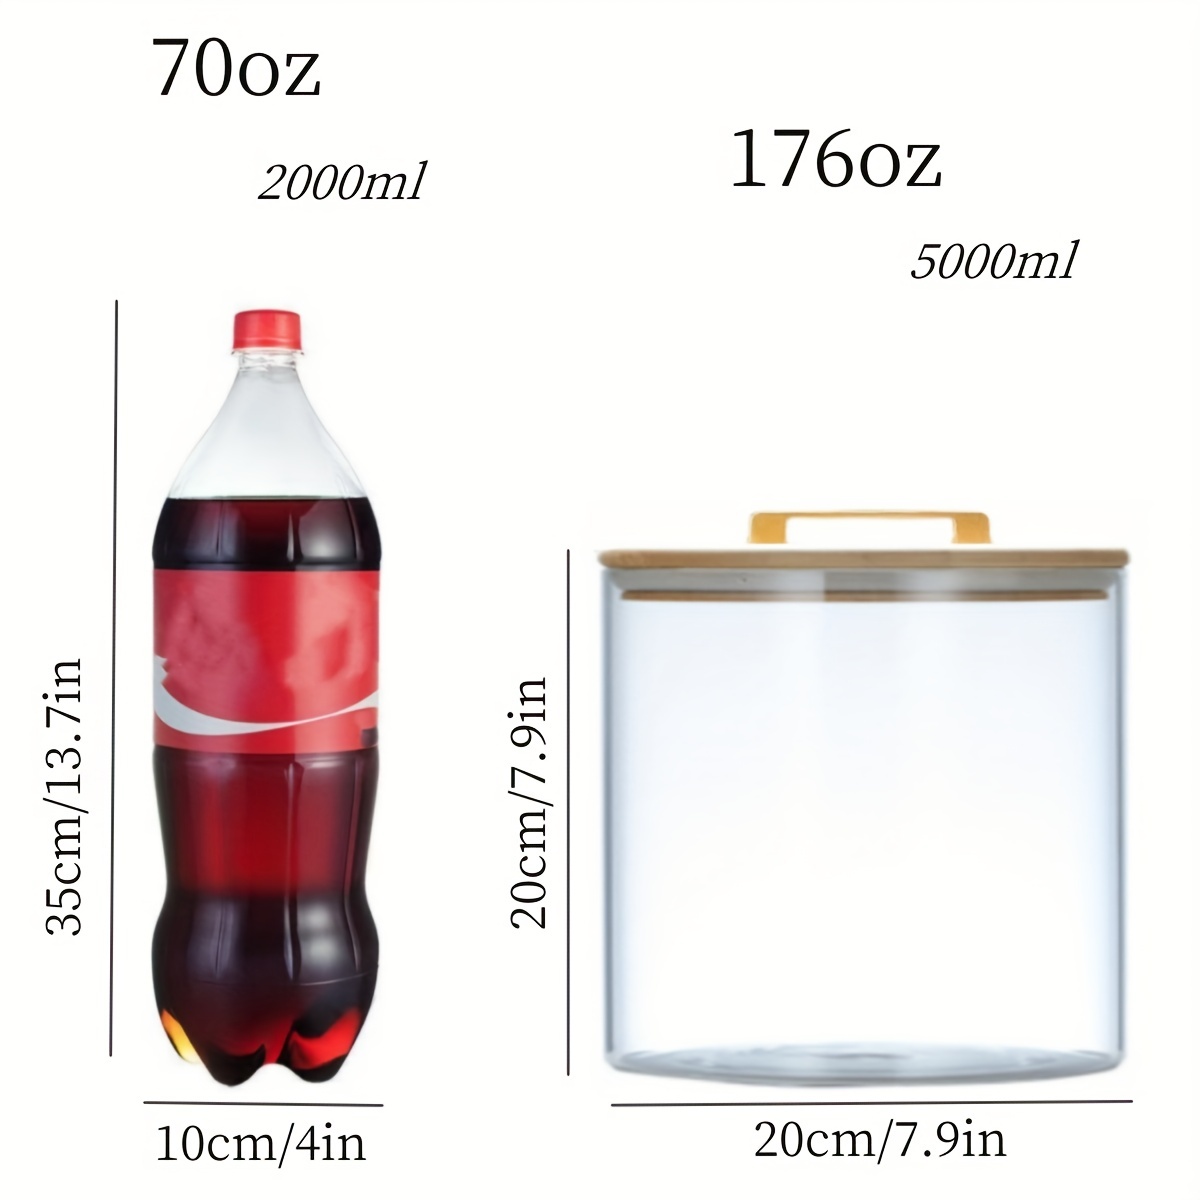 4 Liter to 7 Liter Glass Bottles and Containers